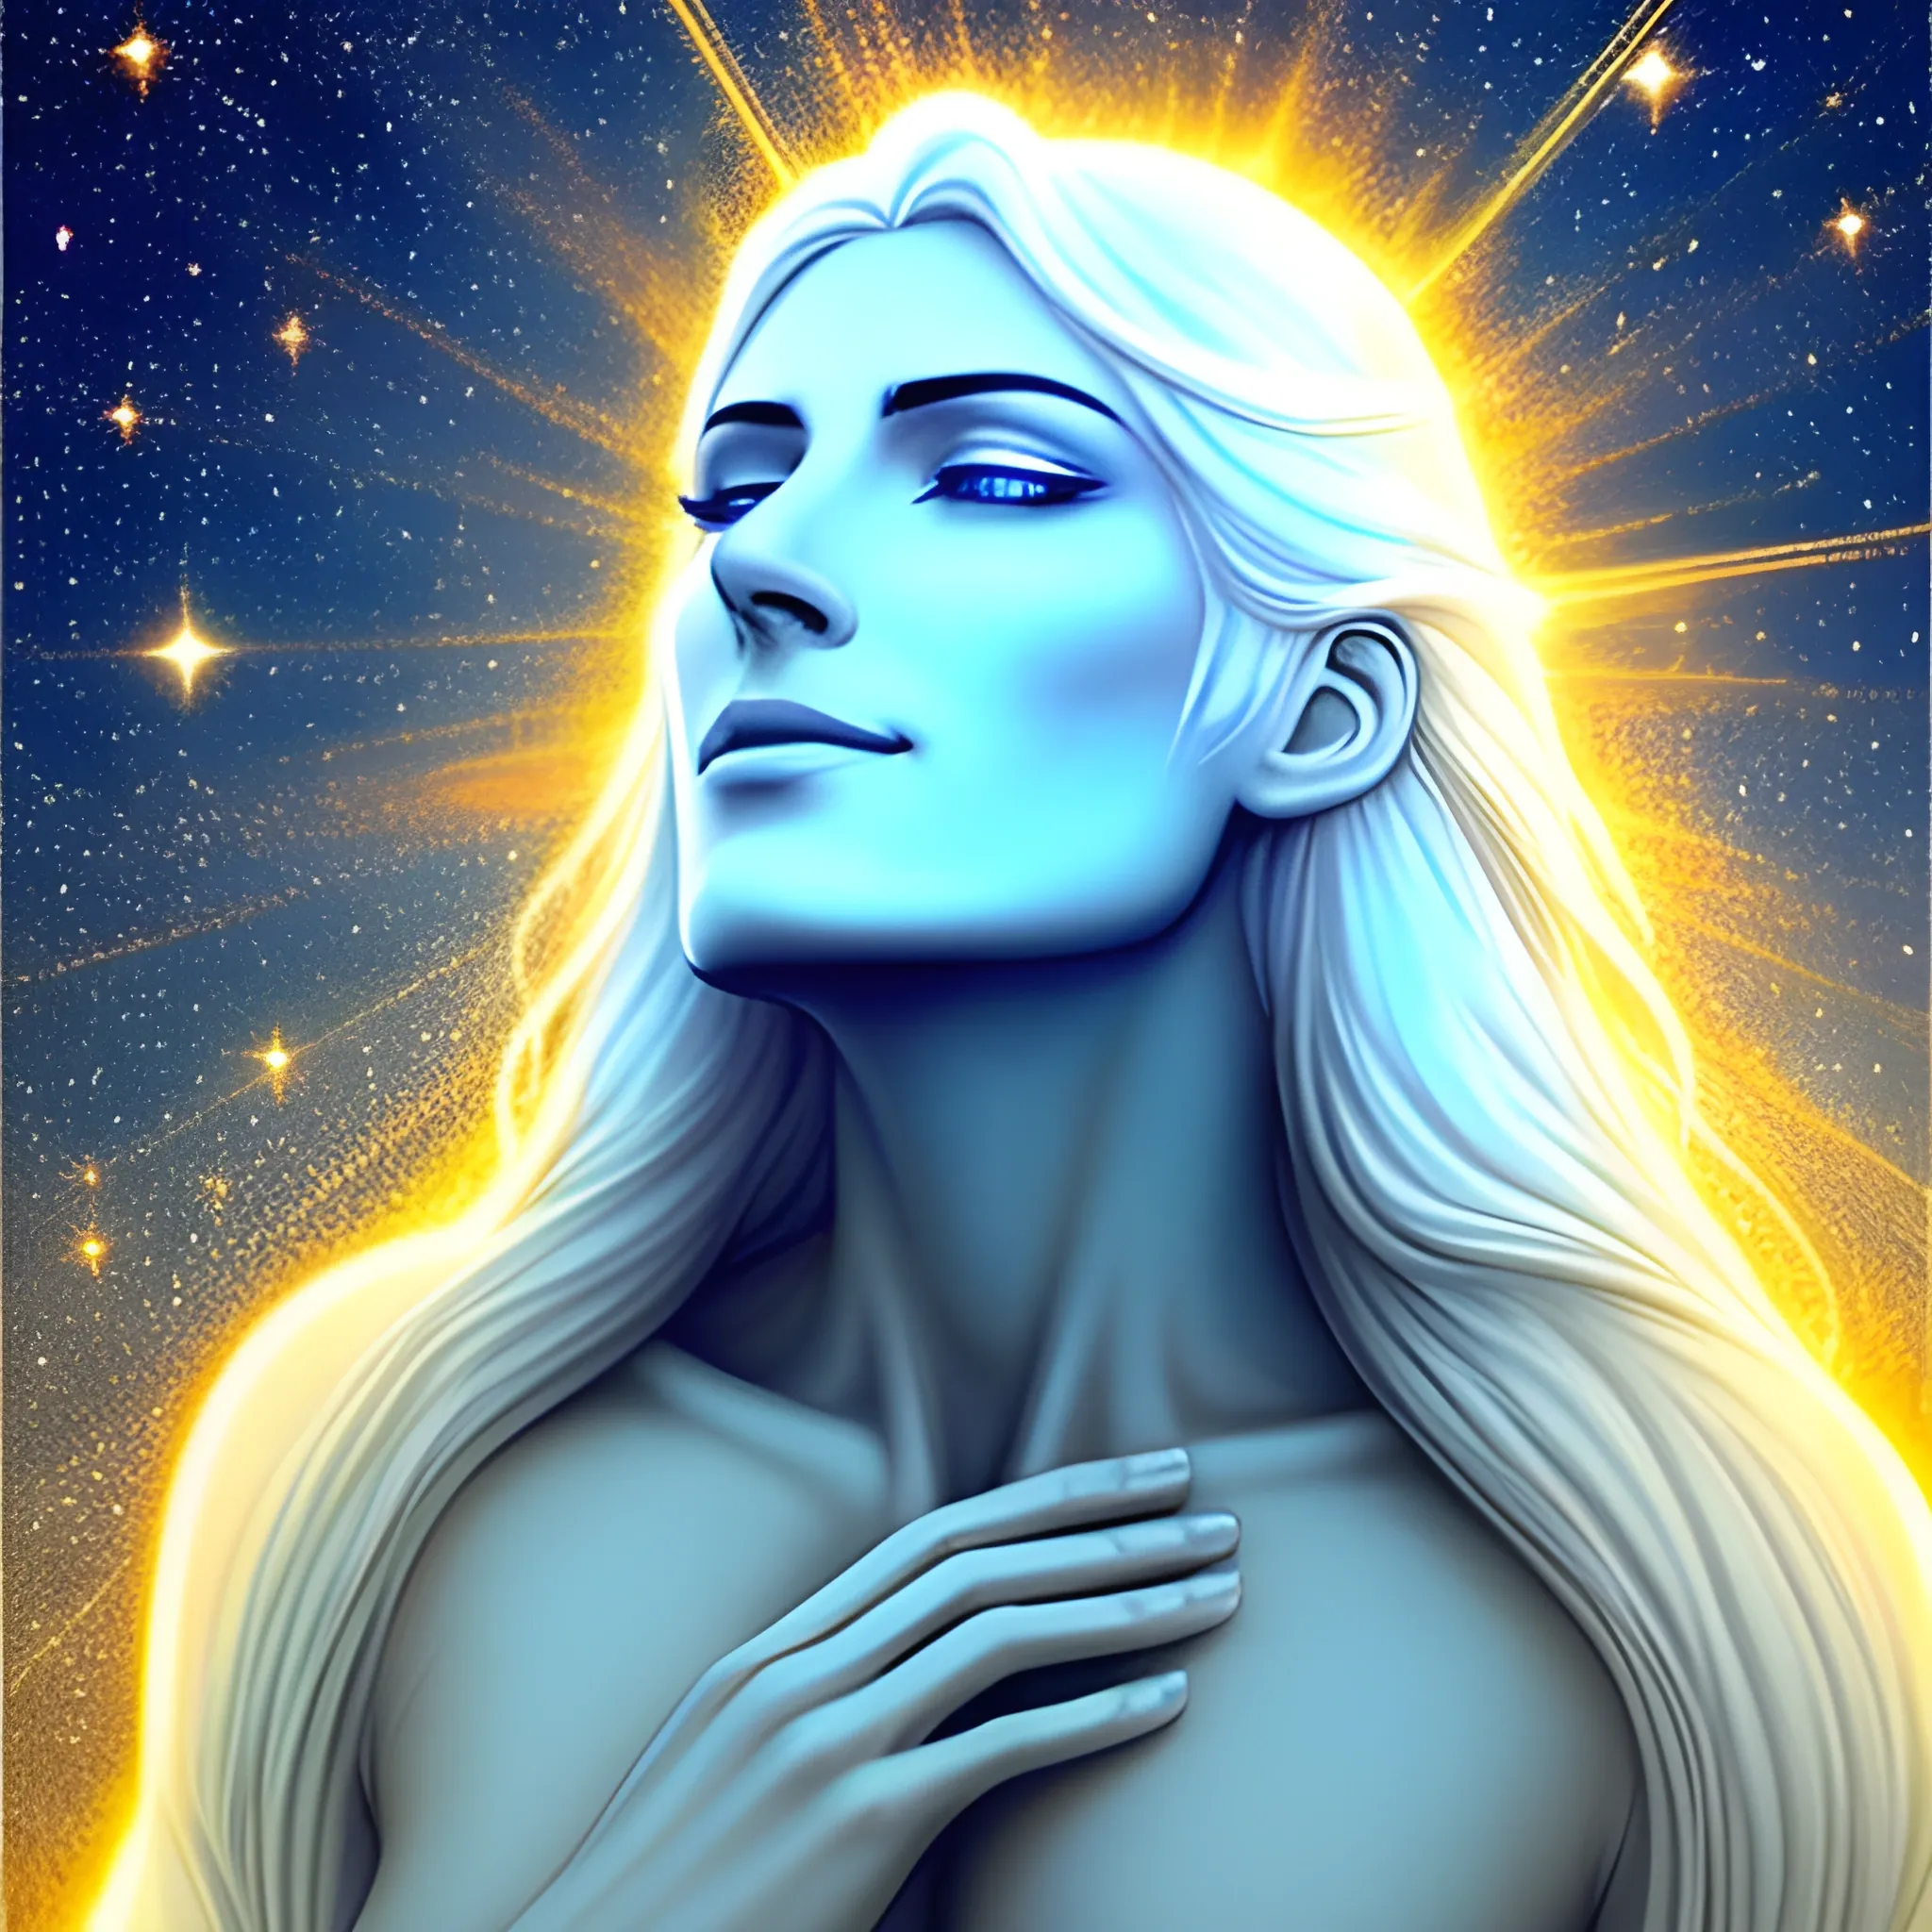 An image of God looking up, his eyes gently closed in contemplation. His white hair flows in an aura of golden light, while His right hand is extended towards the sky, emitting a soft divine light. His expression is serene and full of love, and there is a sense of peace and protection emanating from Him. All around, small particles of golden light float, as if they were blessings being spread throughout the universe.